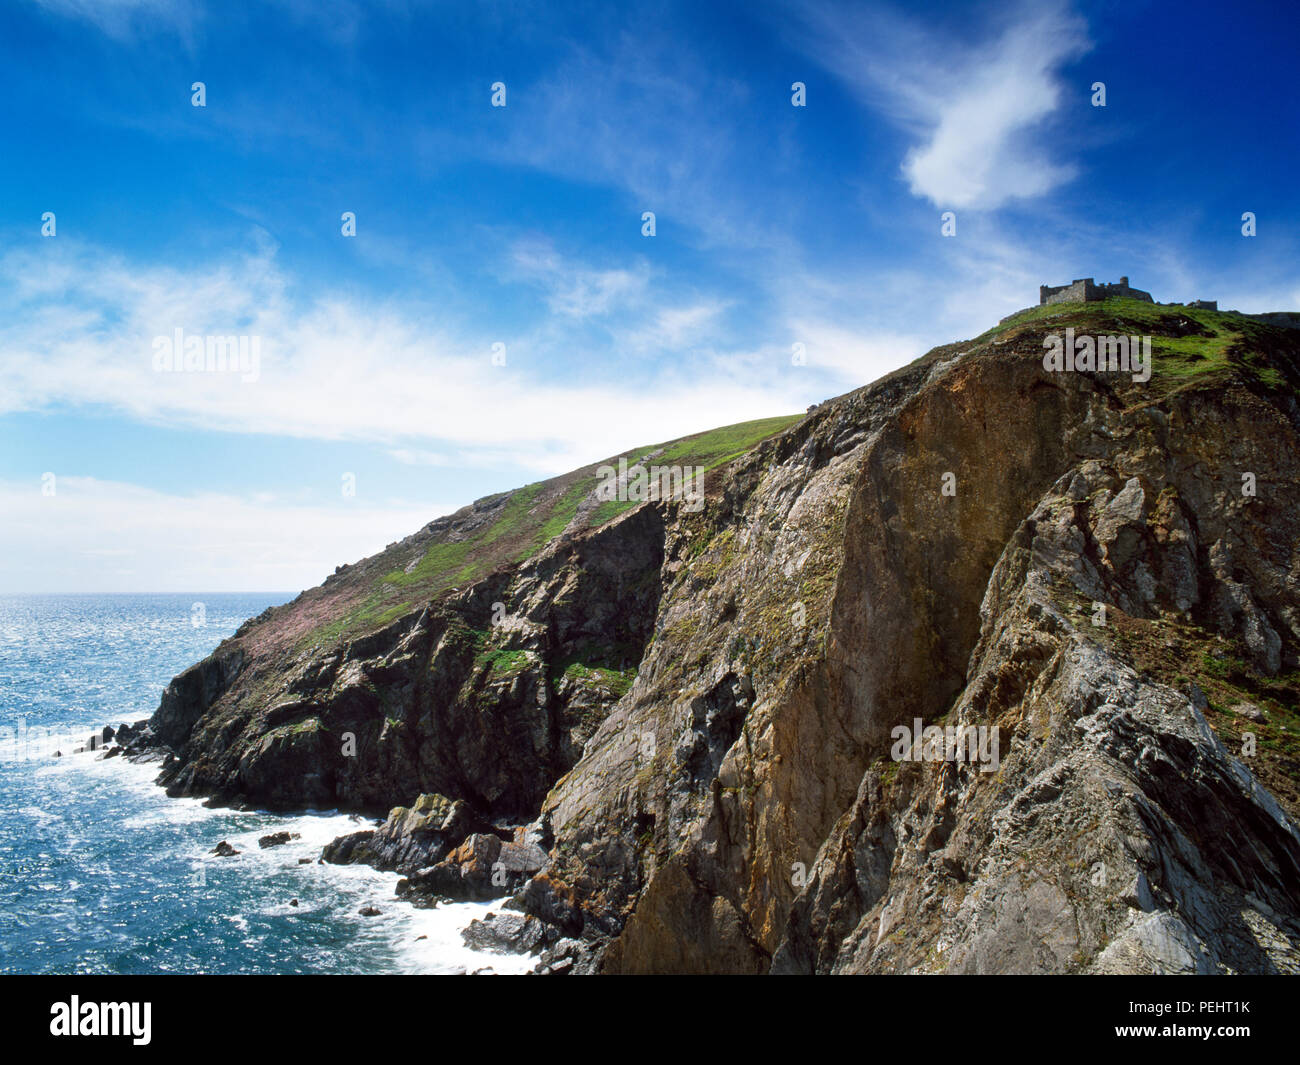 View WSW from South Light, Lundy Island, Devon, UK, to Lametry Bay & The Castle (Marisco Castle) on Castle Hill: built 1243-4 on command of Henry III. Stock Photo